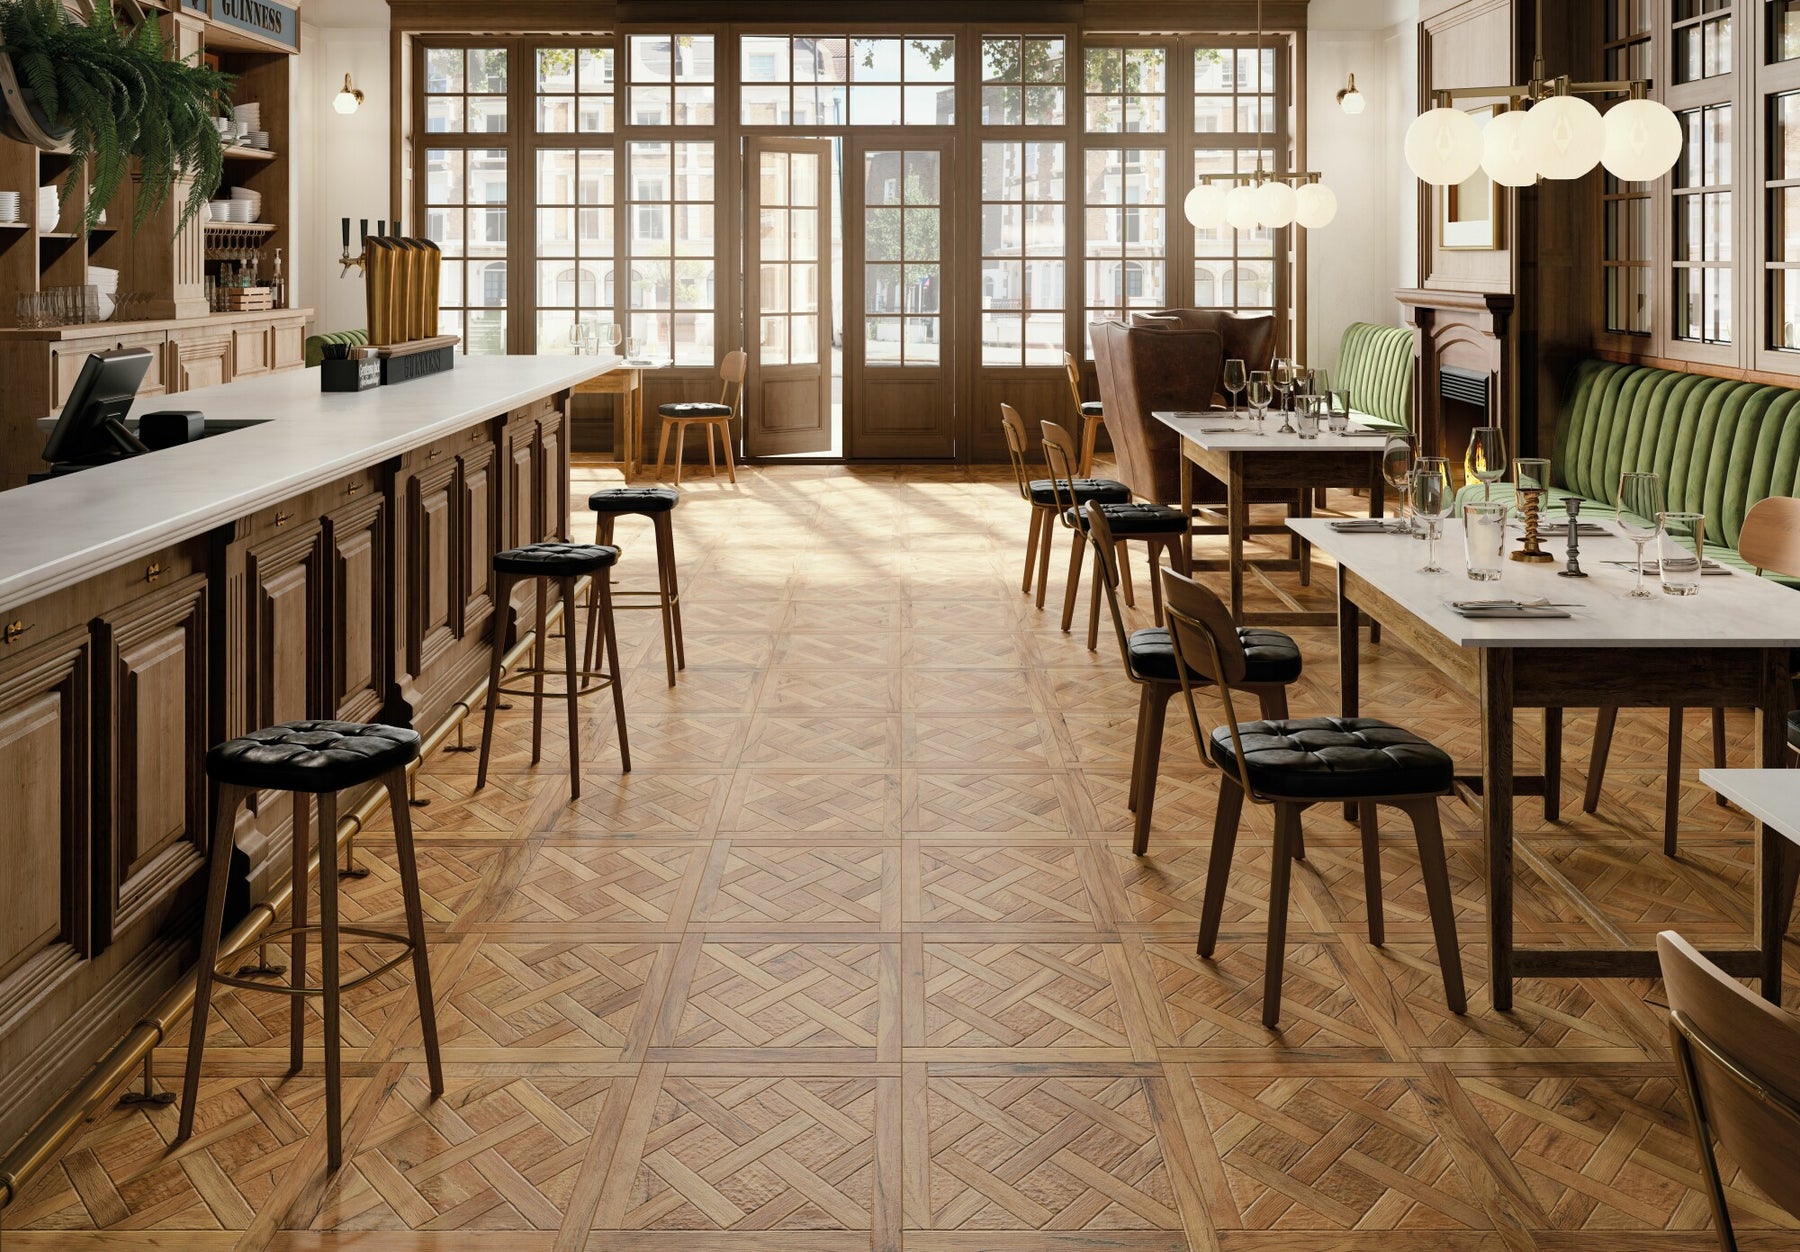 45x45cm Forest Natural floor tile in a bar setting with stools, tables and french glass doors